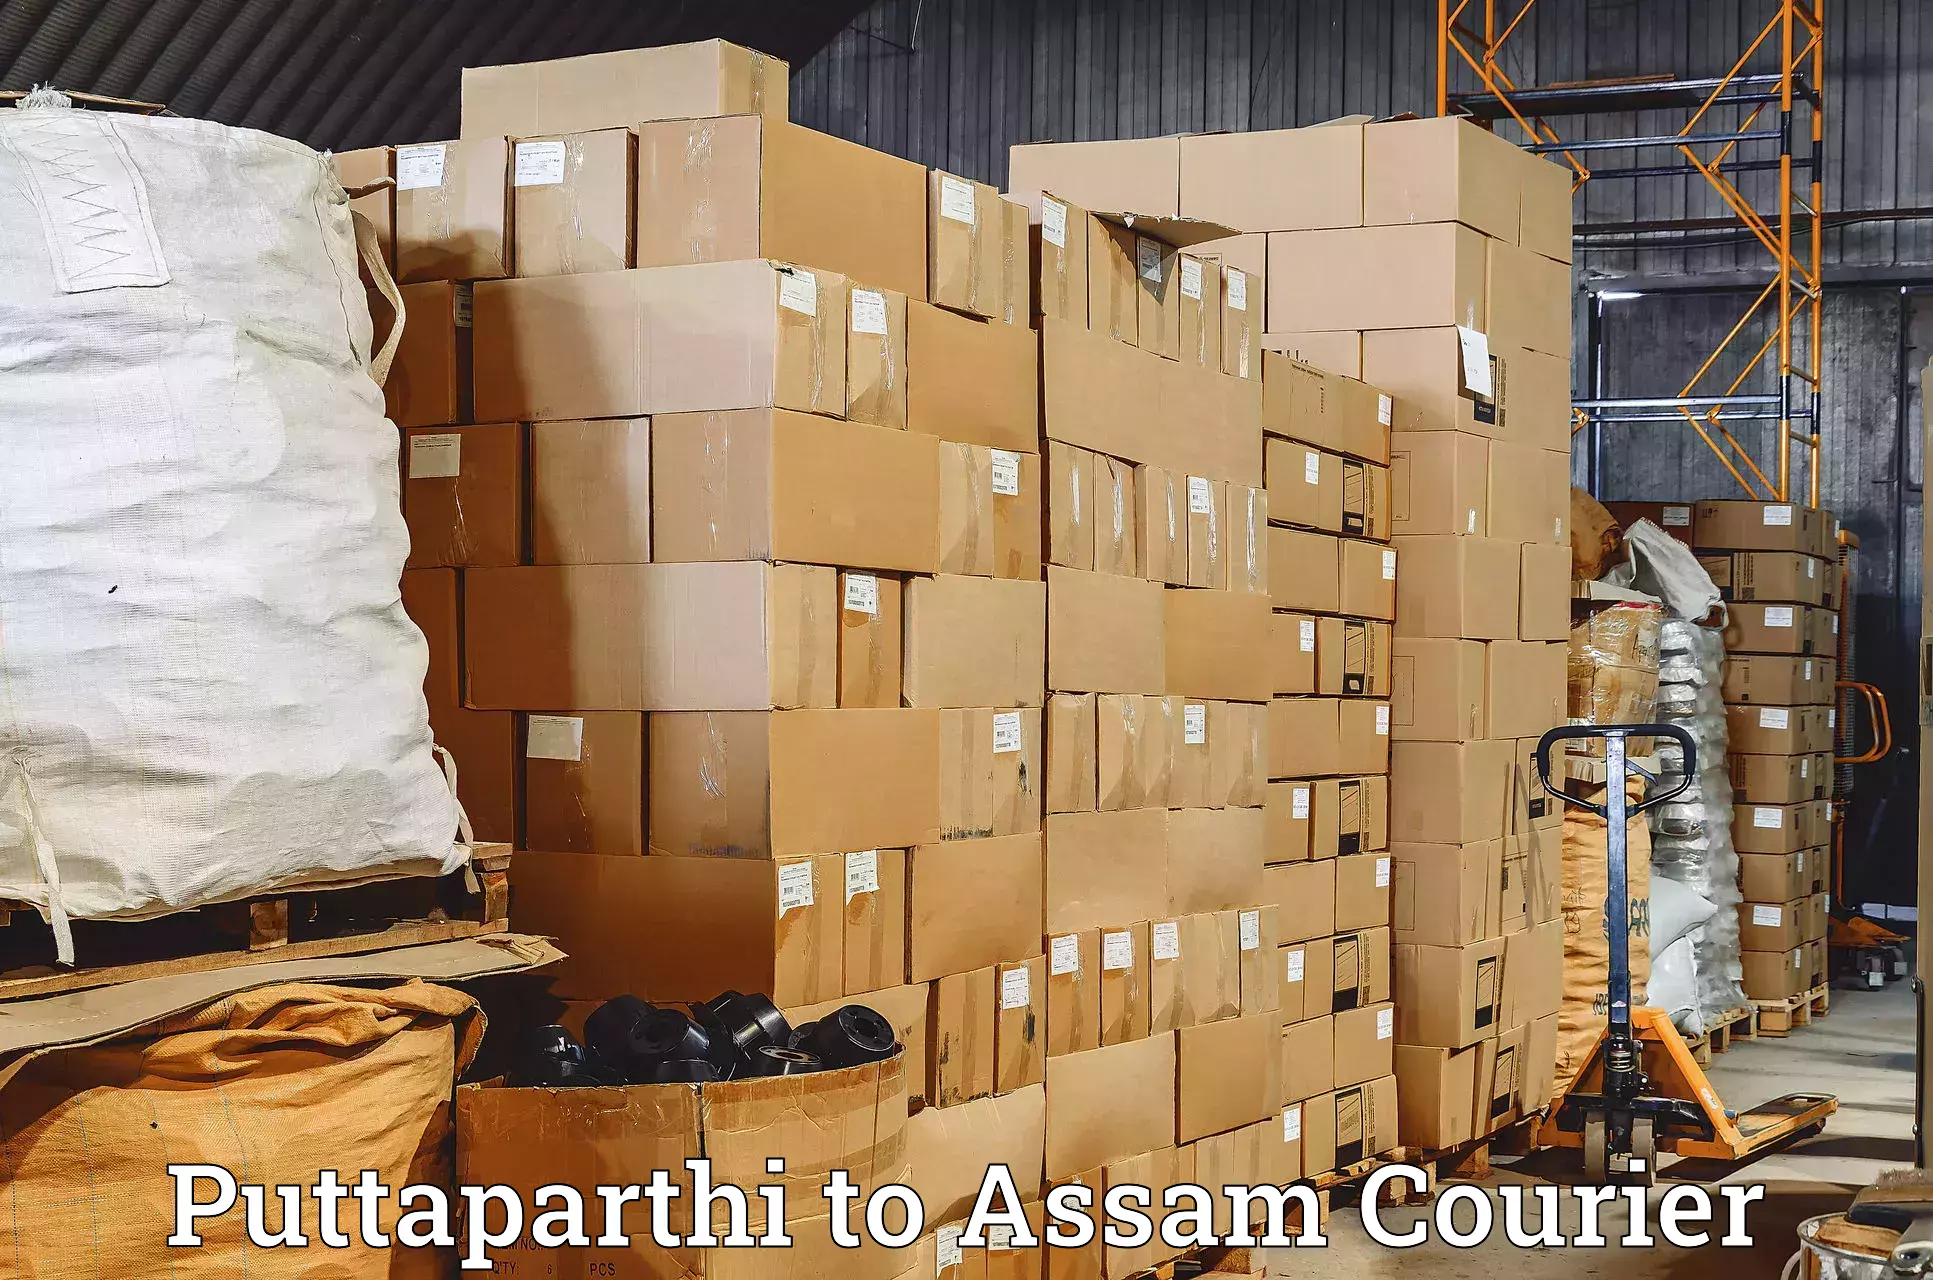 Scheduled delivery in Puttaparthi to Lala Assam